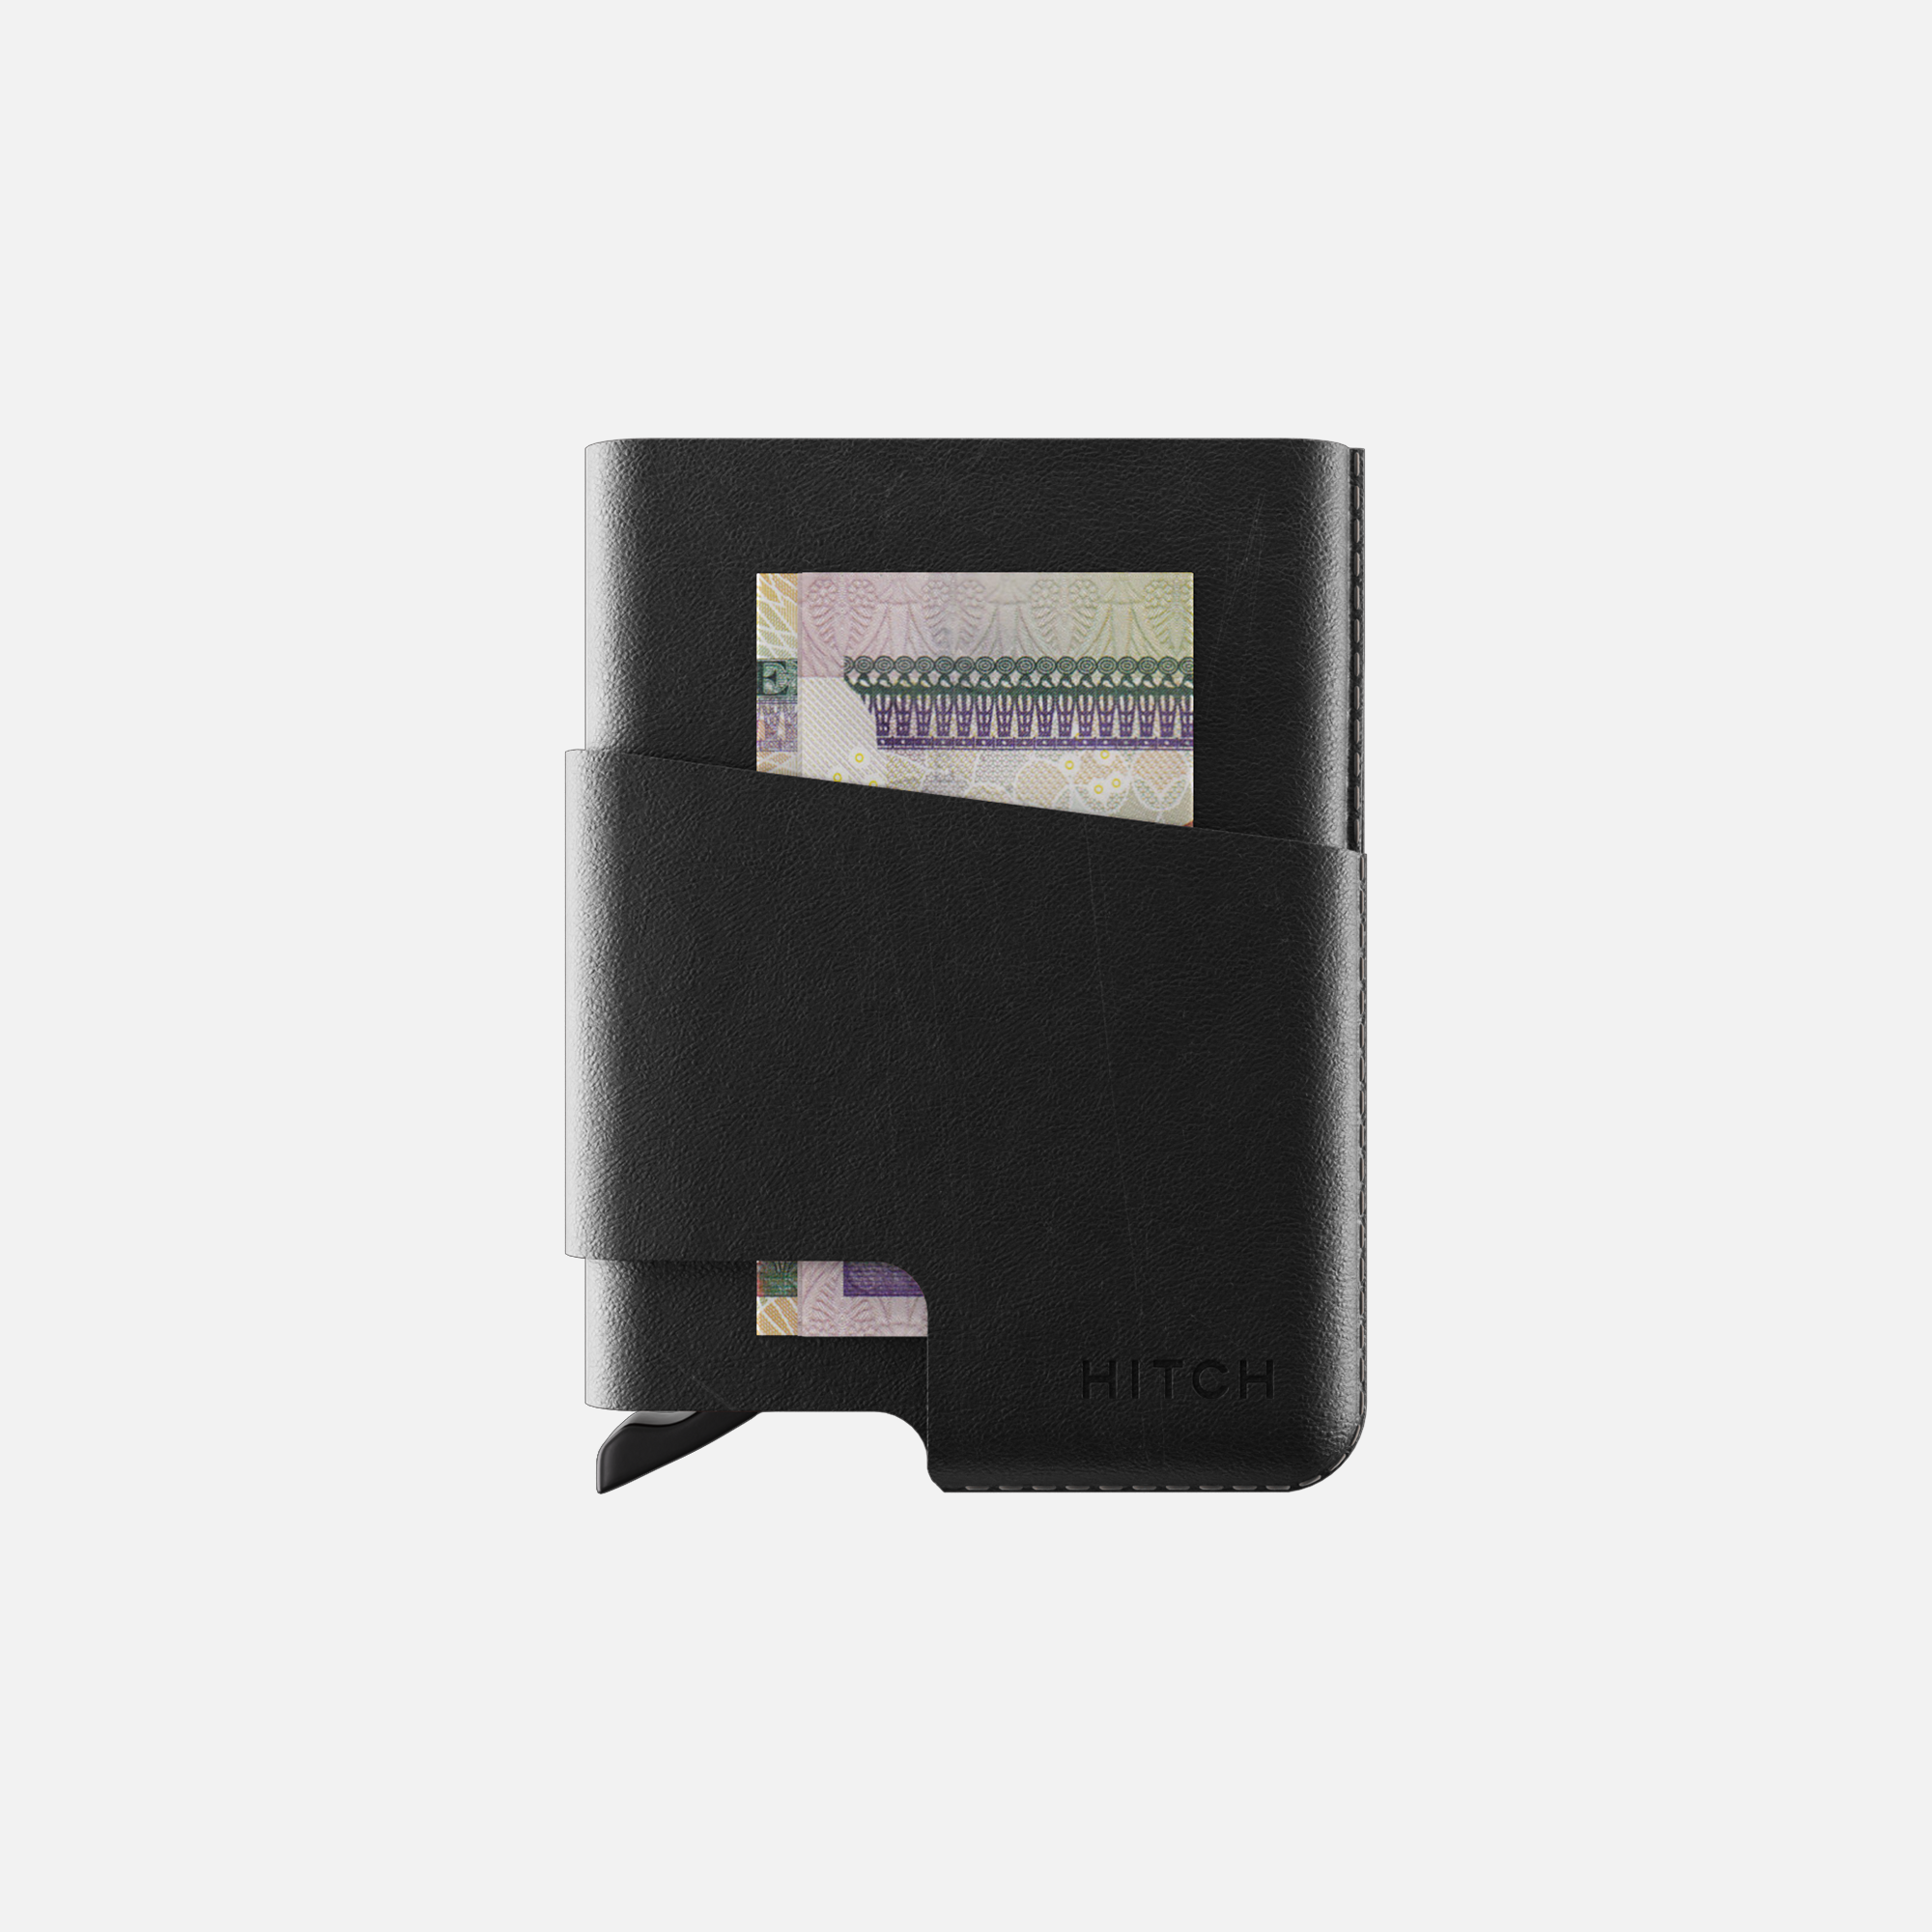 Black wallet with money clip and Egyptian currency note.